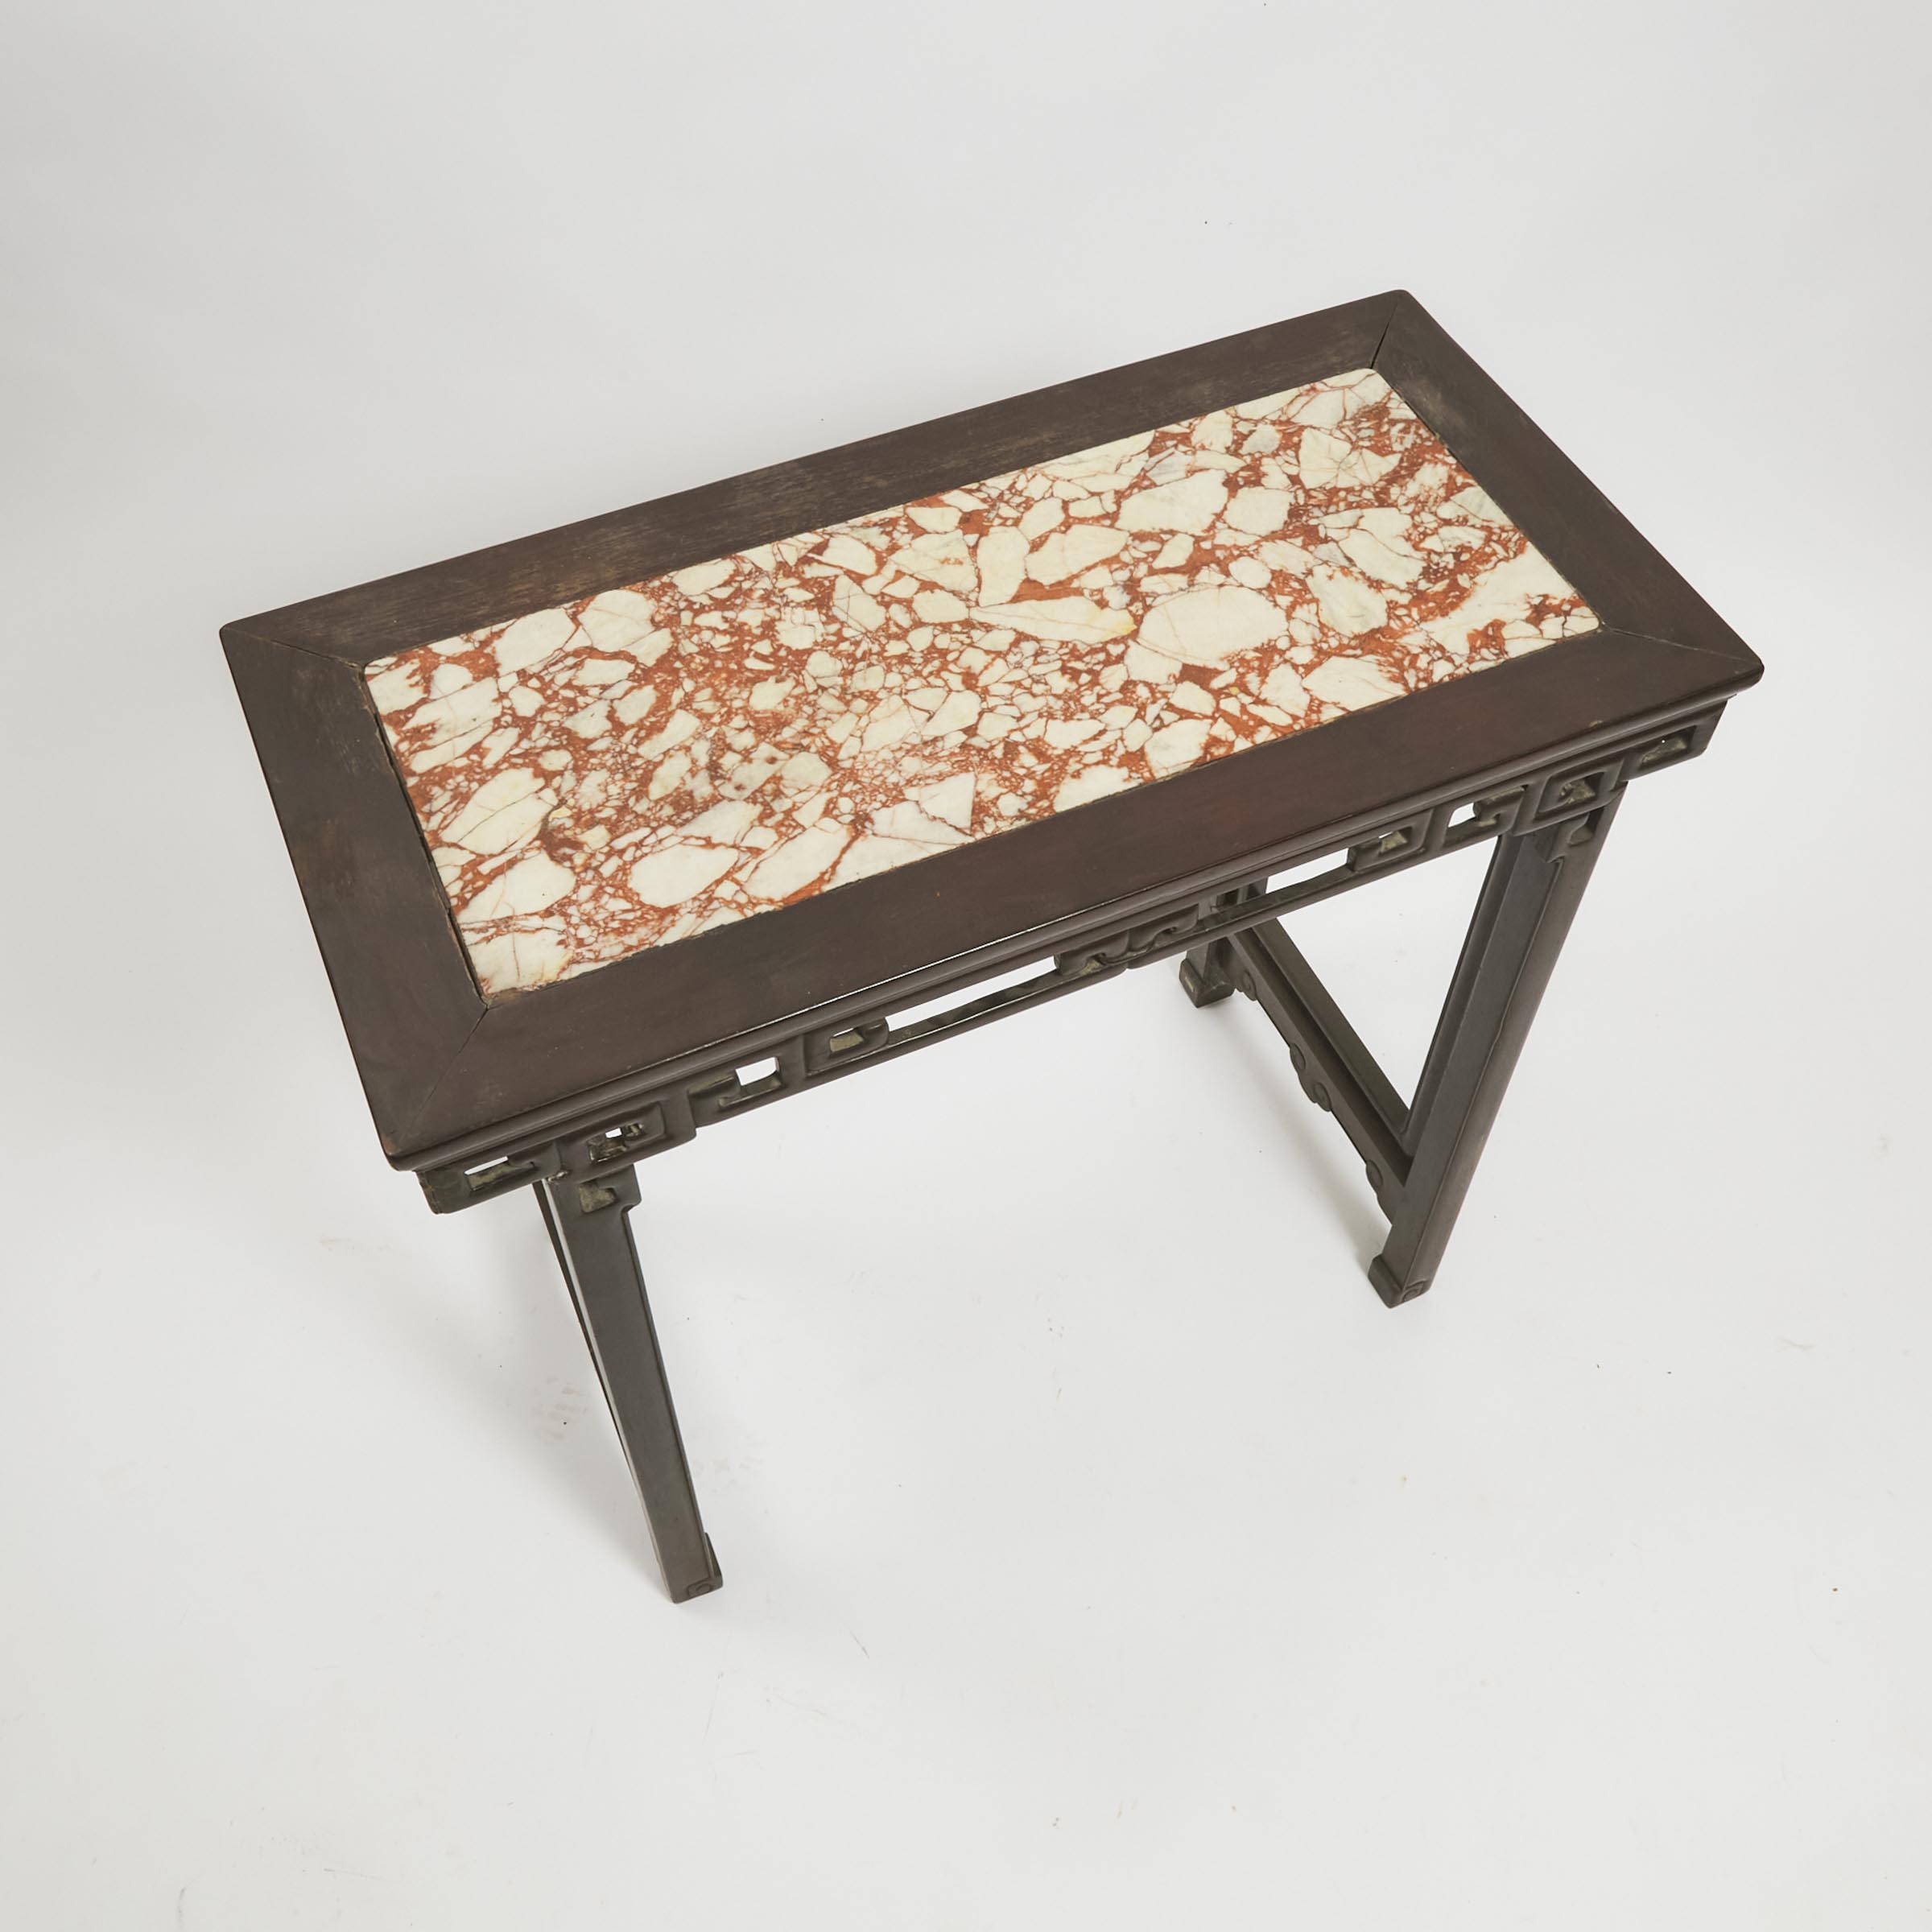 A Chinese Stone-Inset Hardwood Table